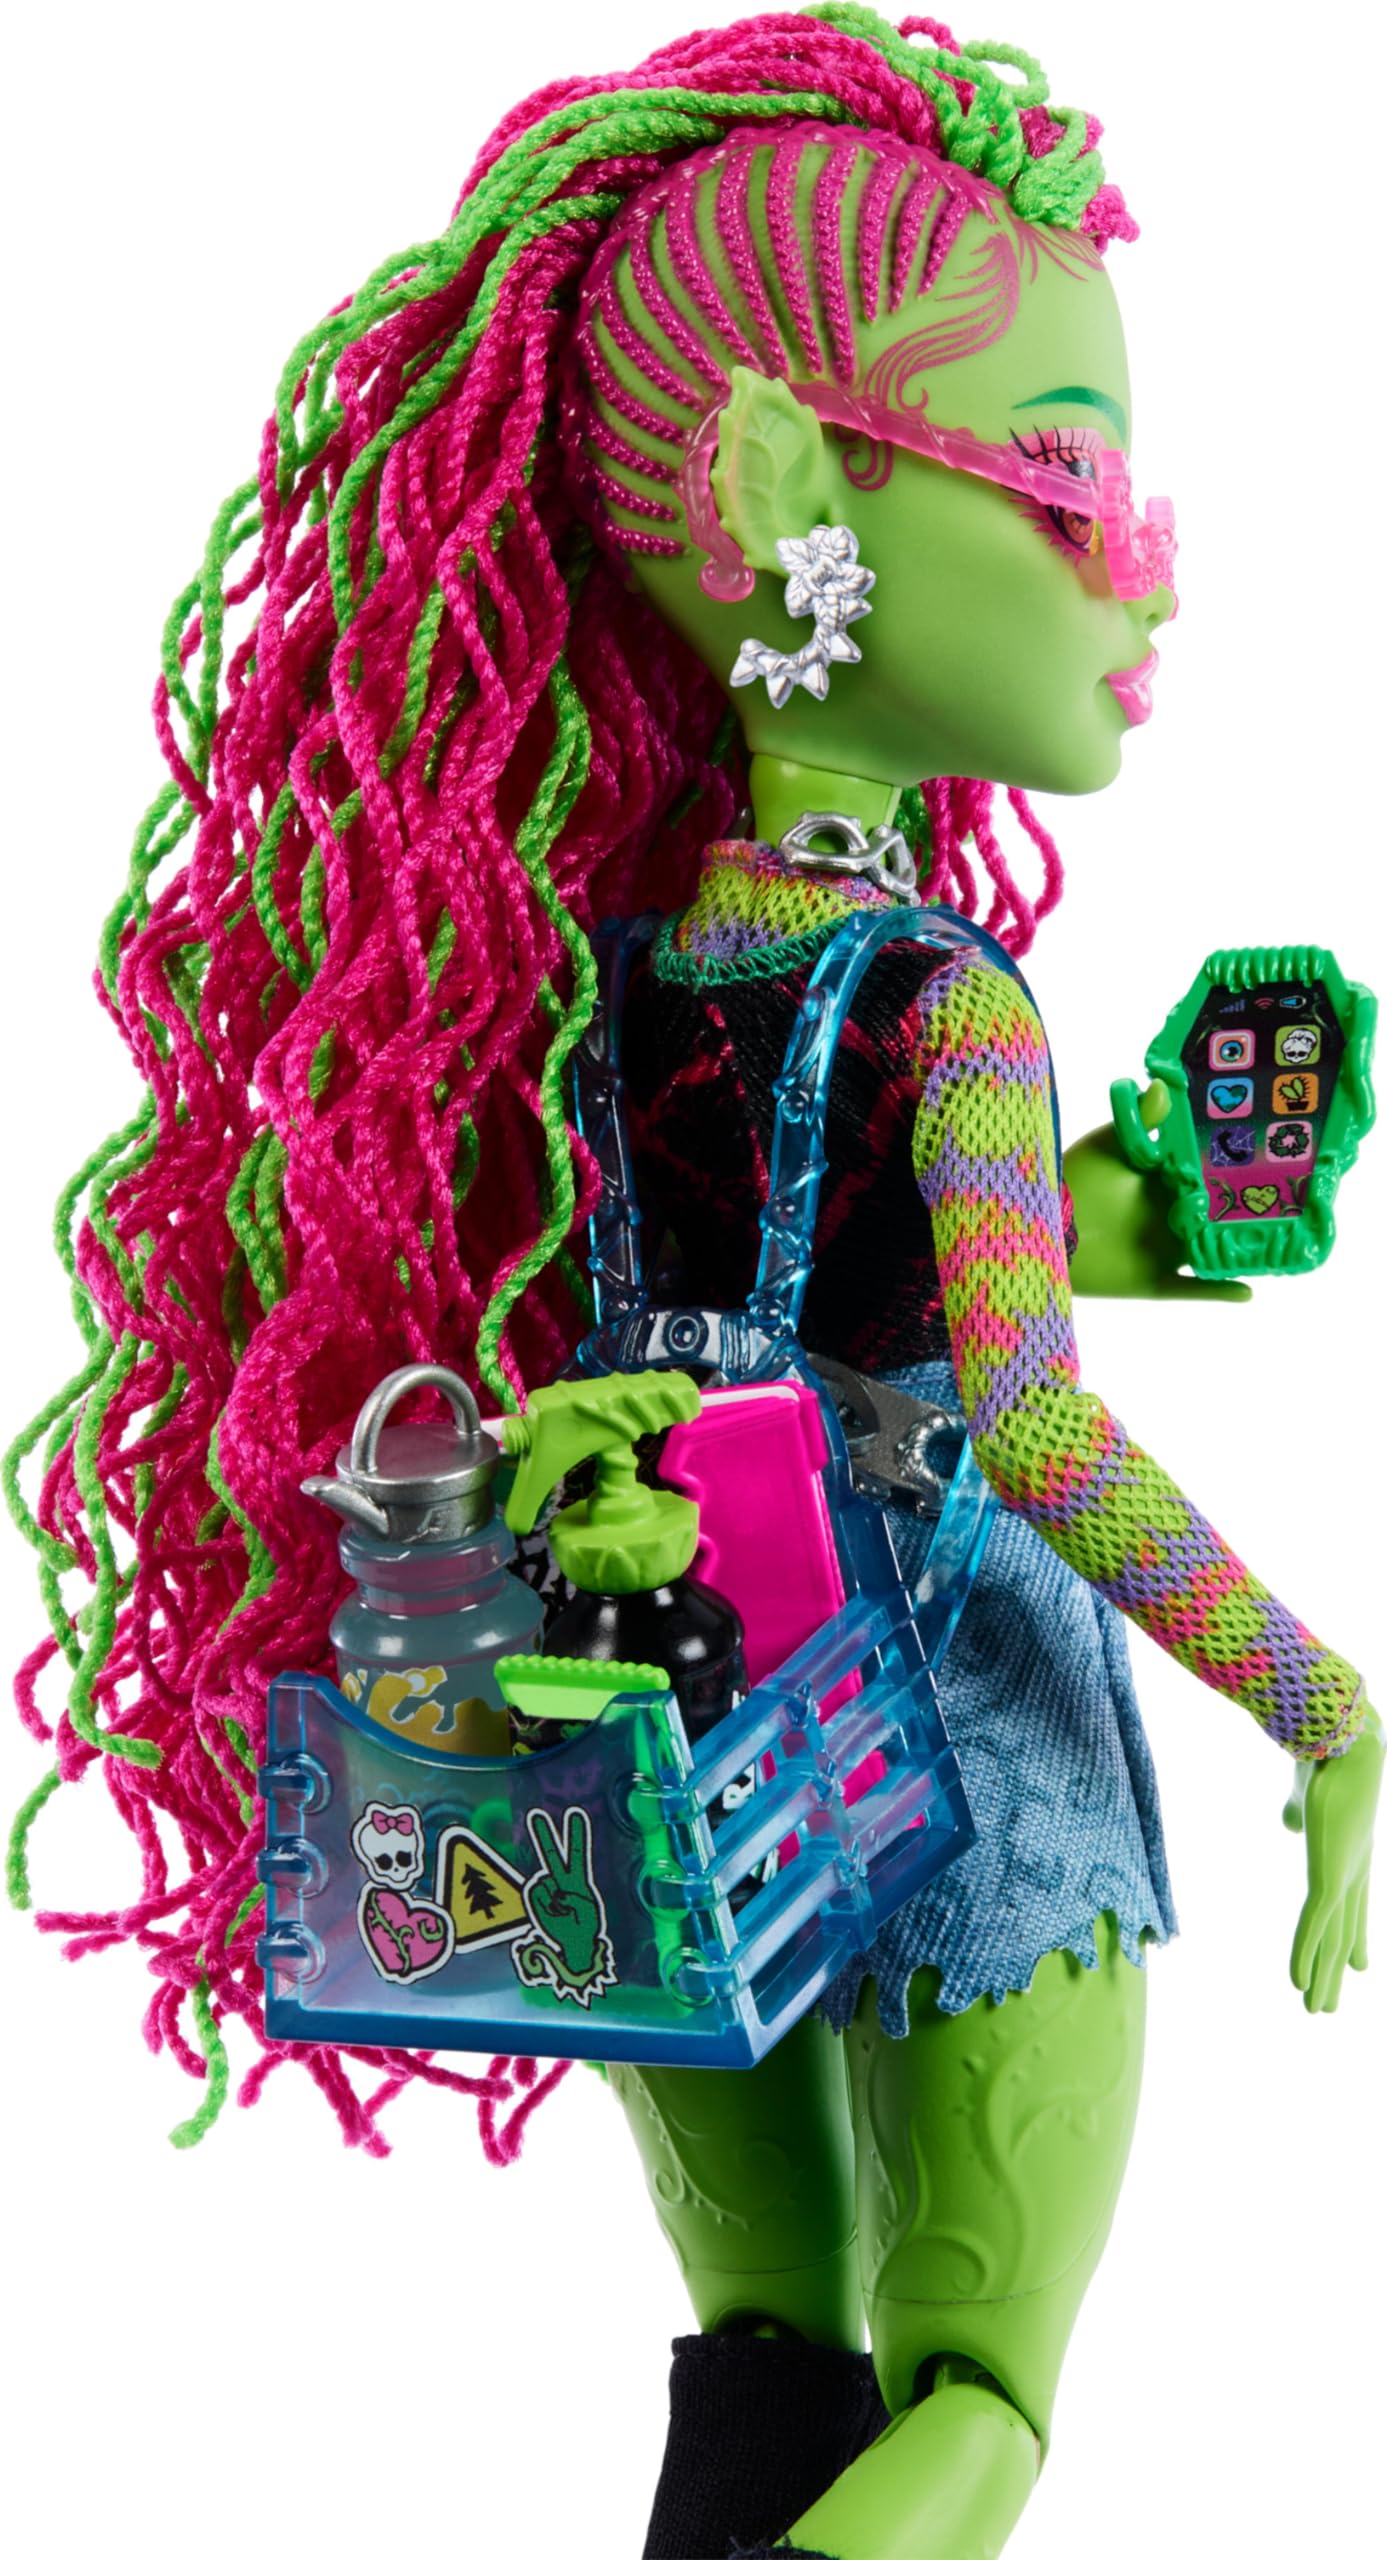 Monster High Venus McFlytrap Doll with Plant Monster Pet Cat Chewlian and Accessories Like Backpack, Notebook, Snacks and More